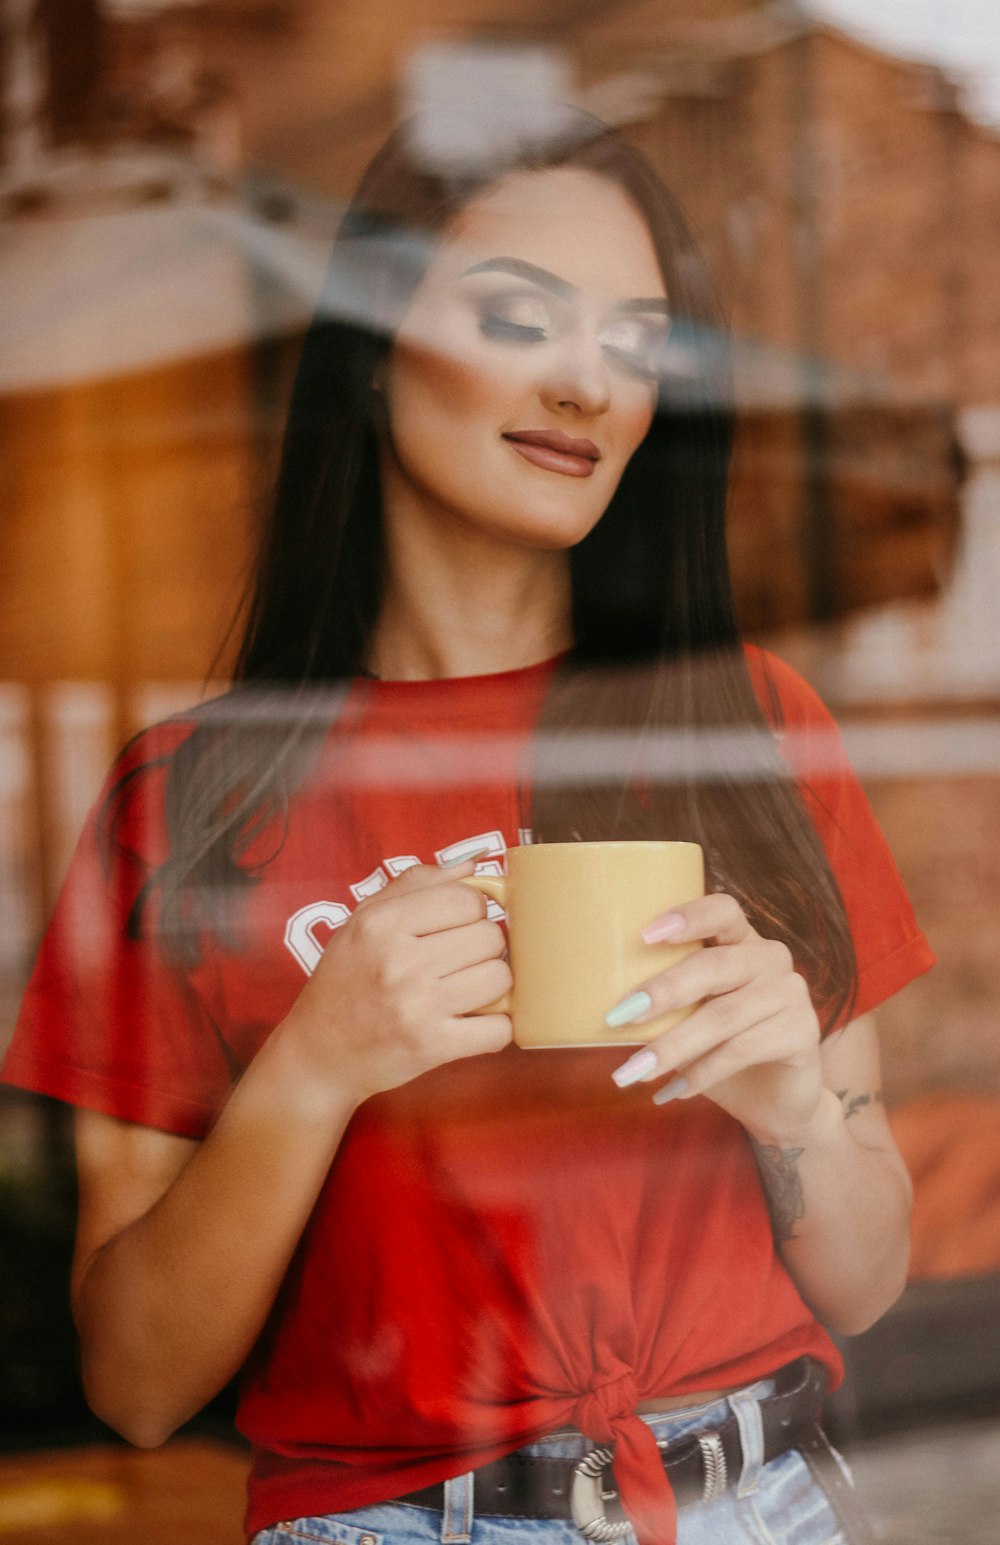 a woman in a red shirt holding a coffee cup